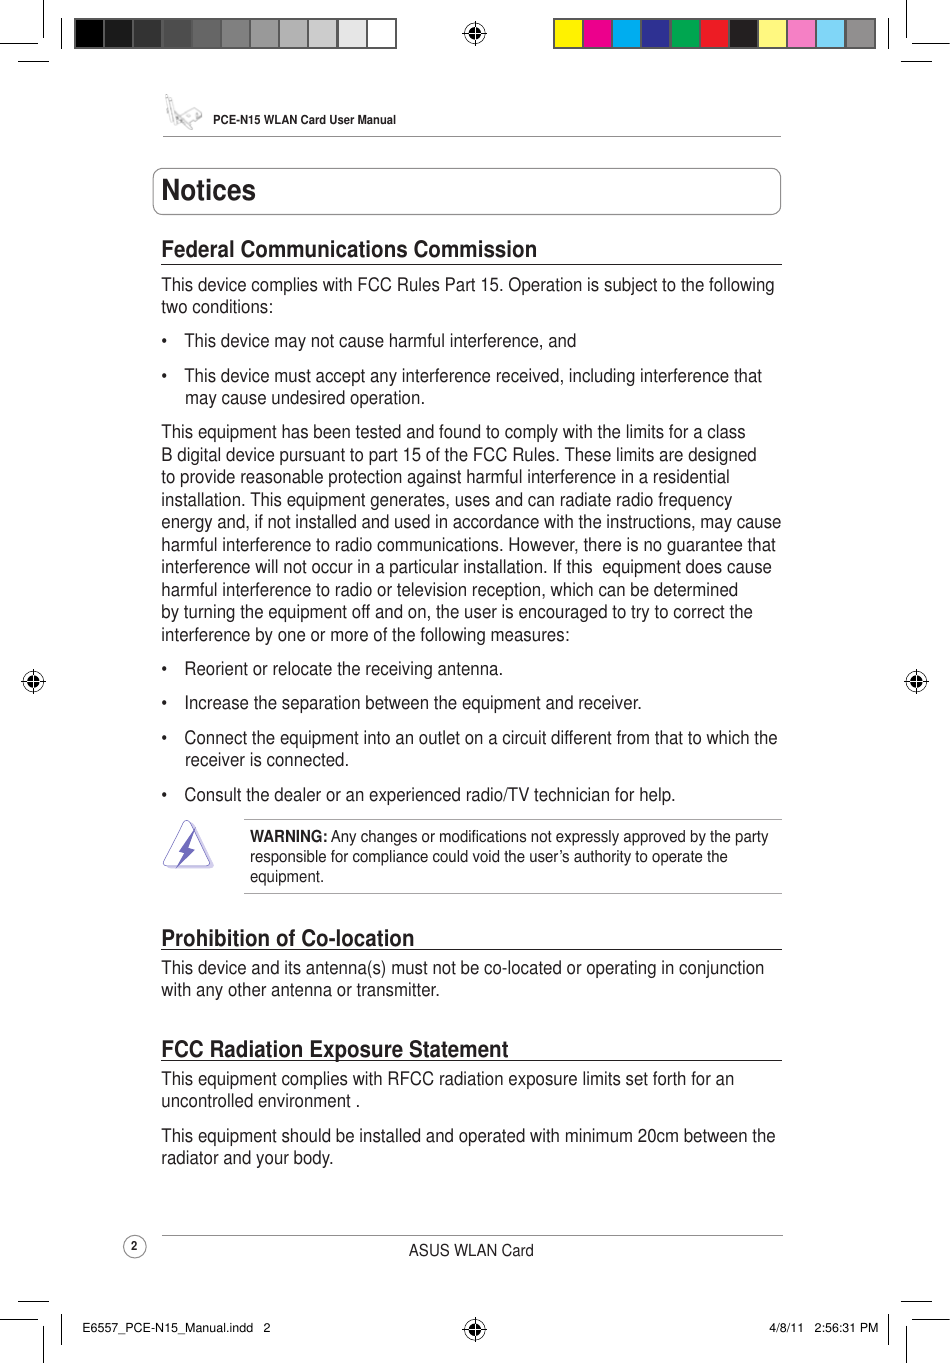 PCE-N15 WLAN Card User Manual2ASUS WLAN CardFederal Communications CommissionThis device complies with FCC Rules Part 15. Operation is subject to the following two conditions:•  This device may not cause harmful interference, and•  This device must accept any interference received, including interference that may cause undesired operation.This equipment has been tested and found to comply with the limits for a class B digital device pursuant to part 15 of the FCC Rules. These limits are designed to provide reasonable protection against harmful interference in a residential installation. This equipment generates, uses and can radiate radio frequency energy and, if not installed and used in accordance with the instructions, may cause harmful interference to radio communications. However, there is no guarantee that interference will not occur in a particular installation. If this  equipment does cause harmful interference to radio or television reception, which can be determined by turning the equipment off and on, the user is encouraged to try to correct the interference by one or more of the following measures:•  Reorient or relocate the receiving antenna.•  Increase the separation between the equipment and receiver.•  Connect the equipment into an outlet on a circuit different from that to which the receiver is connected.•  Consult the dealer or an experienced radio/TV technician for help.WARNING: Any changes or modications not expressly approved by the party responsible for compliance could void the user’s authority to operate the  equipment.Prohibition of Co-locationThis device and its antenna(s) must not be co-located or operating in conjunction with any other antenna or transmitter.FCC Radiation Exposure StatementThis equipment complies with RFCC radiation exposure limits set forth for an uncontrolled environment .This equipment should be installed and operated with minimum 20cm between the radiator and your body.NoticesE6557_PCE-N15_Manual.indd   2 4/8/11   2:56:31 PM